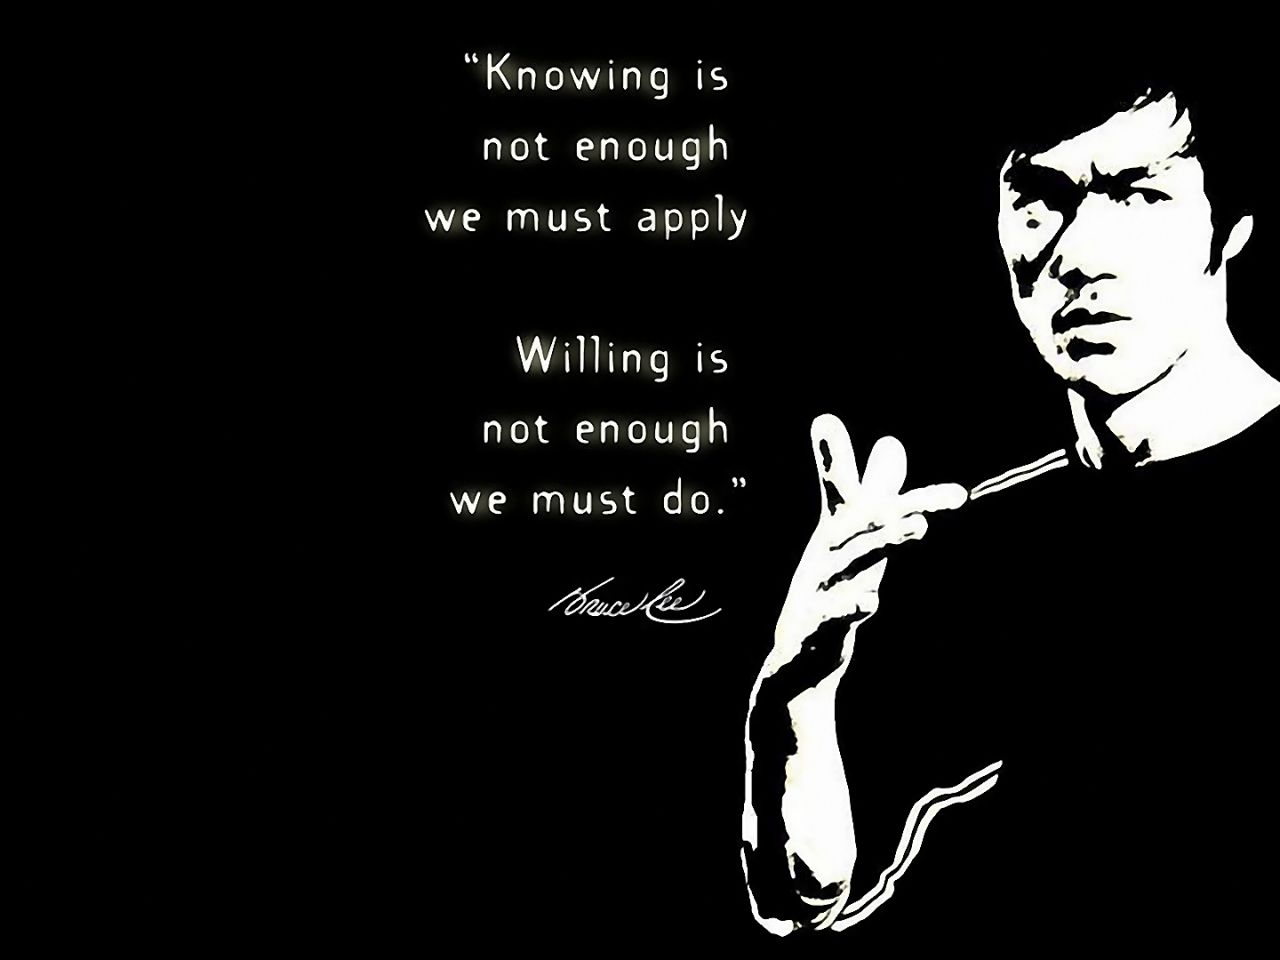 Bruce Lee Quotes Hd Wallpaper - Knowing It Not Enough We Must Apply , HD Wallpaper & Backgrounds